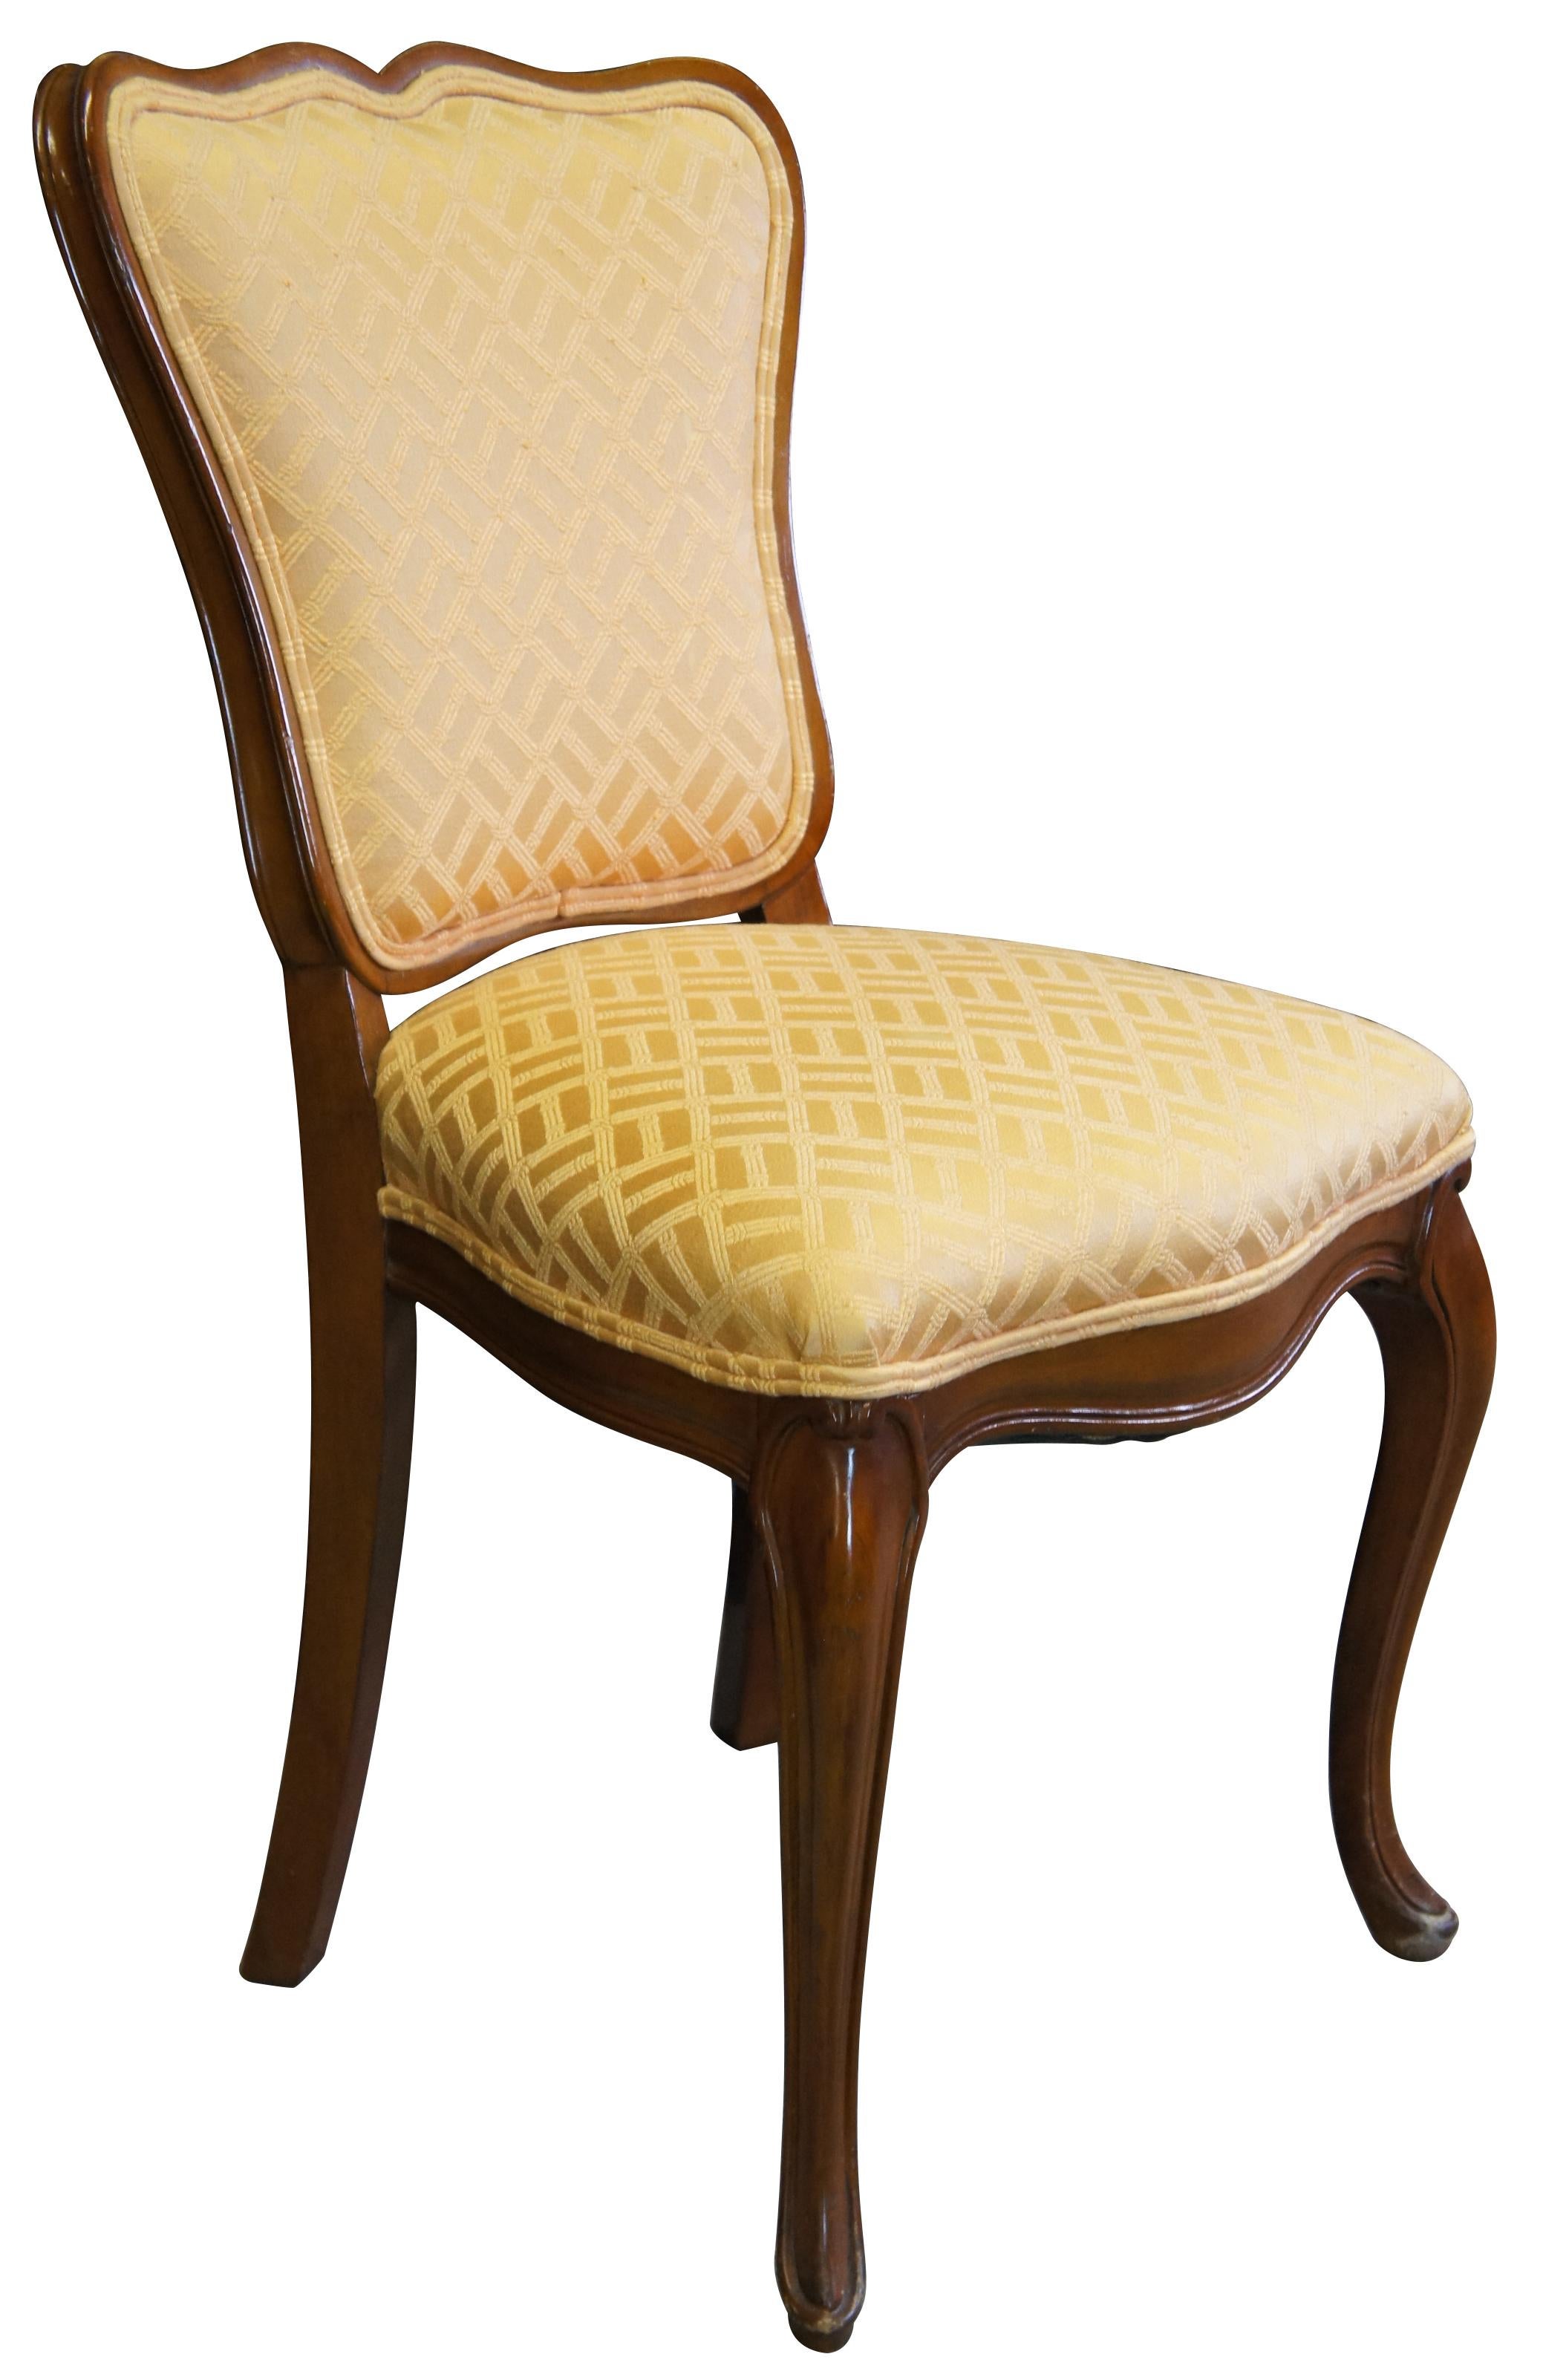 1950s Globe furniture colony court accent chair. French inspired with walnut finish. Features a serpentine crest rail, gold bambook design fabric and cabriole legs. Globe Furniture opened in 1906 and operated out of Highpoint North Carolina.
 